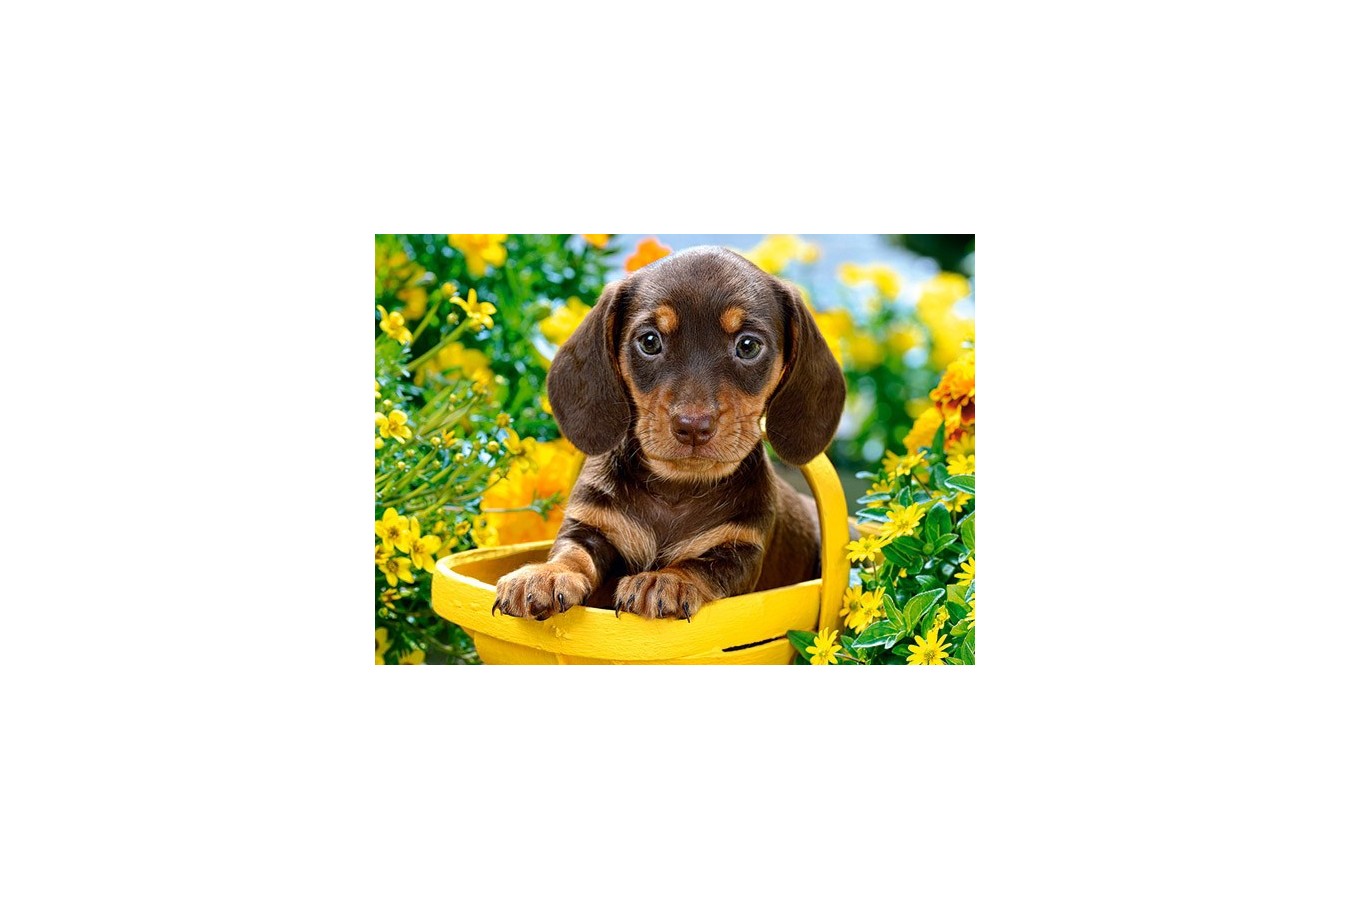 Puzzle Castorland - Puppy In Yellow, 180 Piese